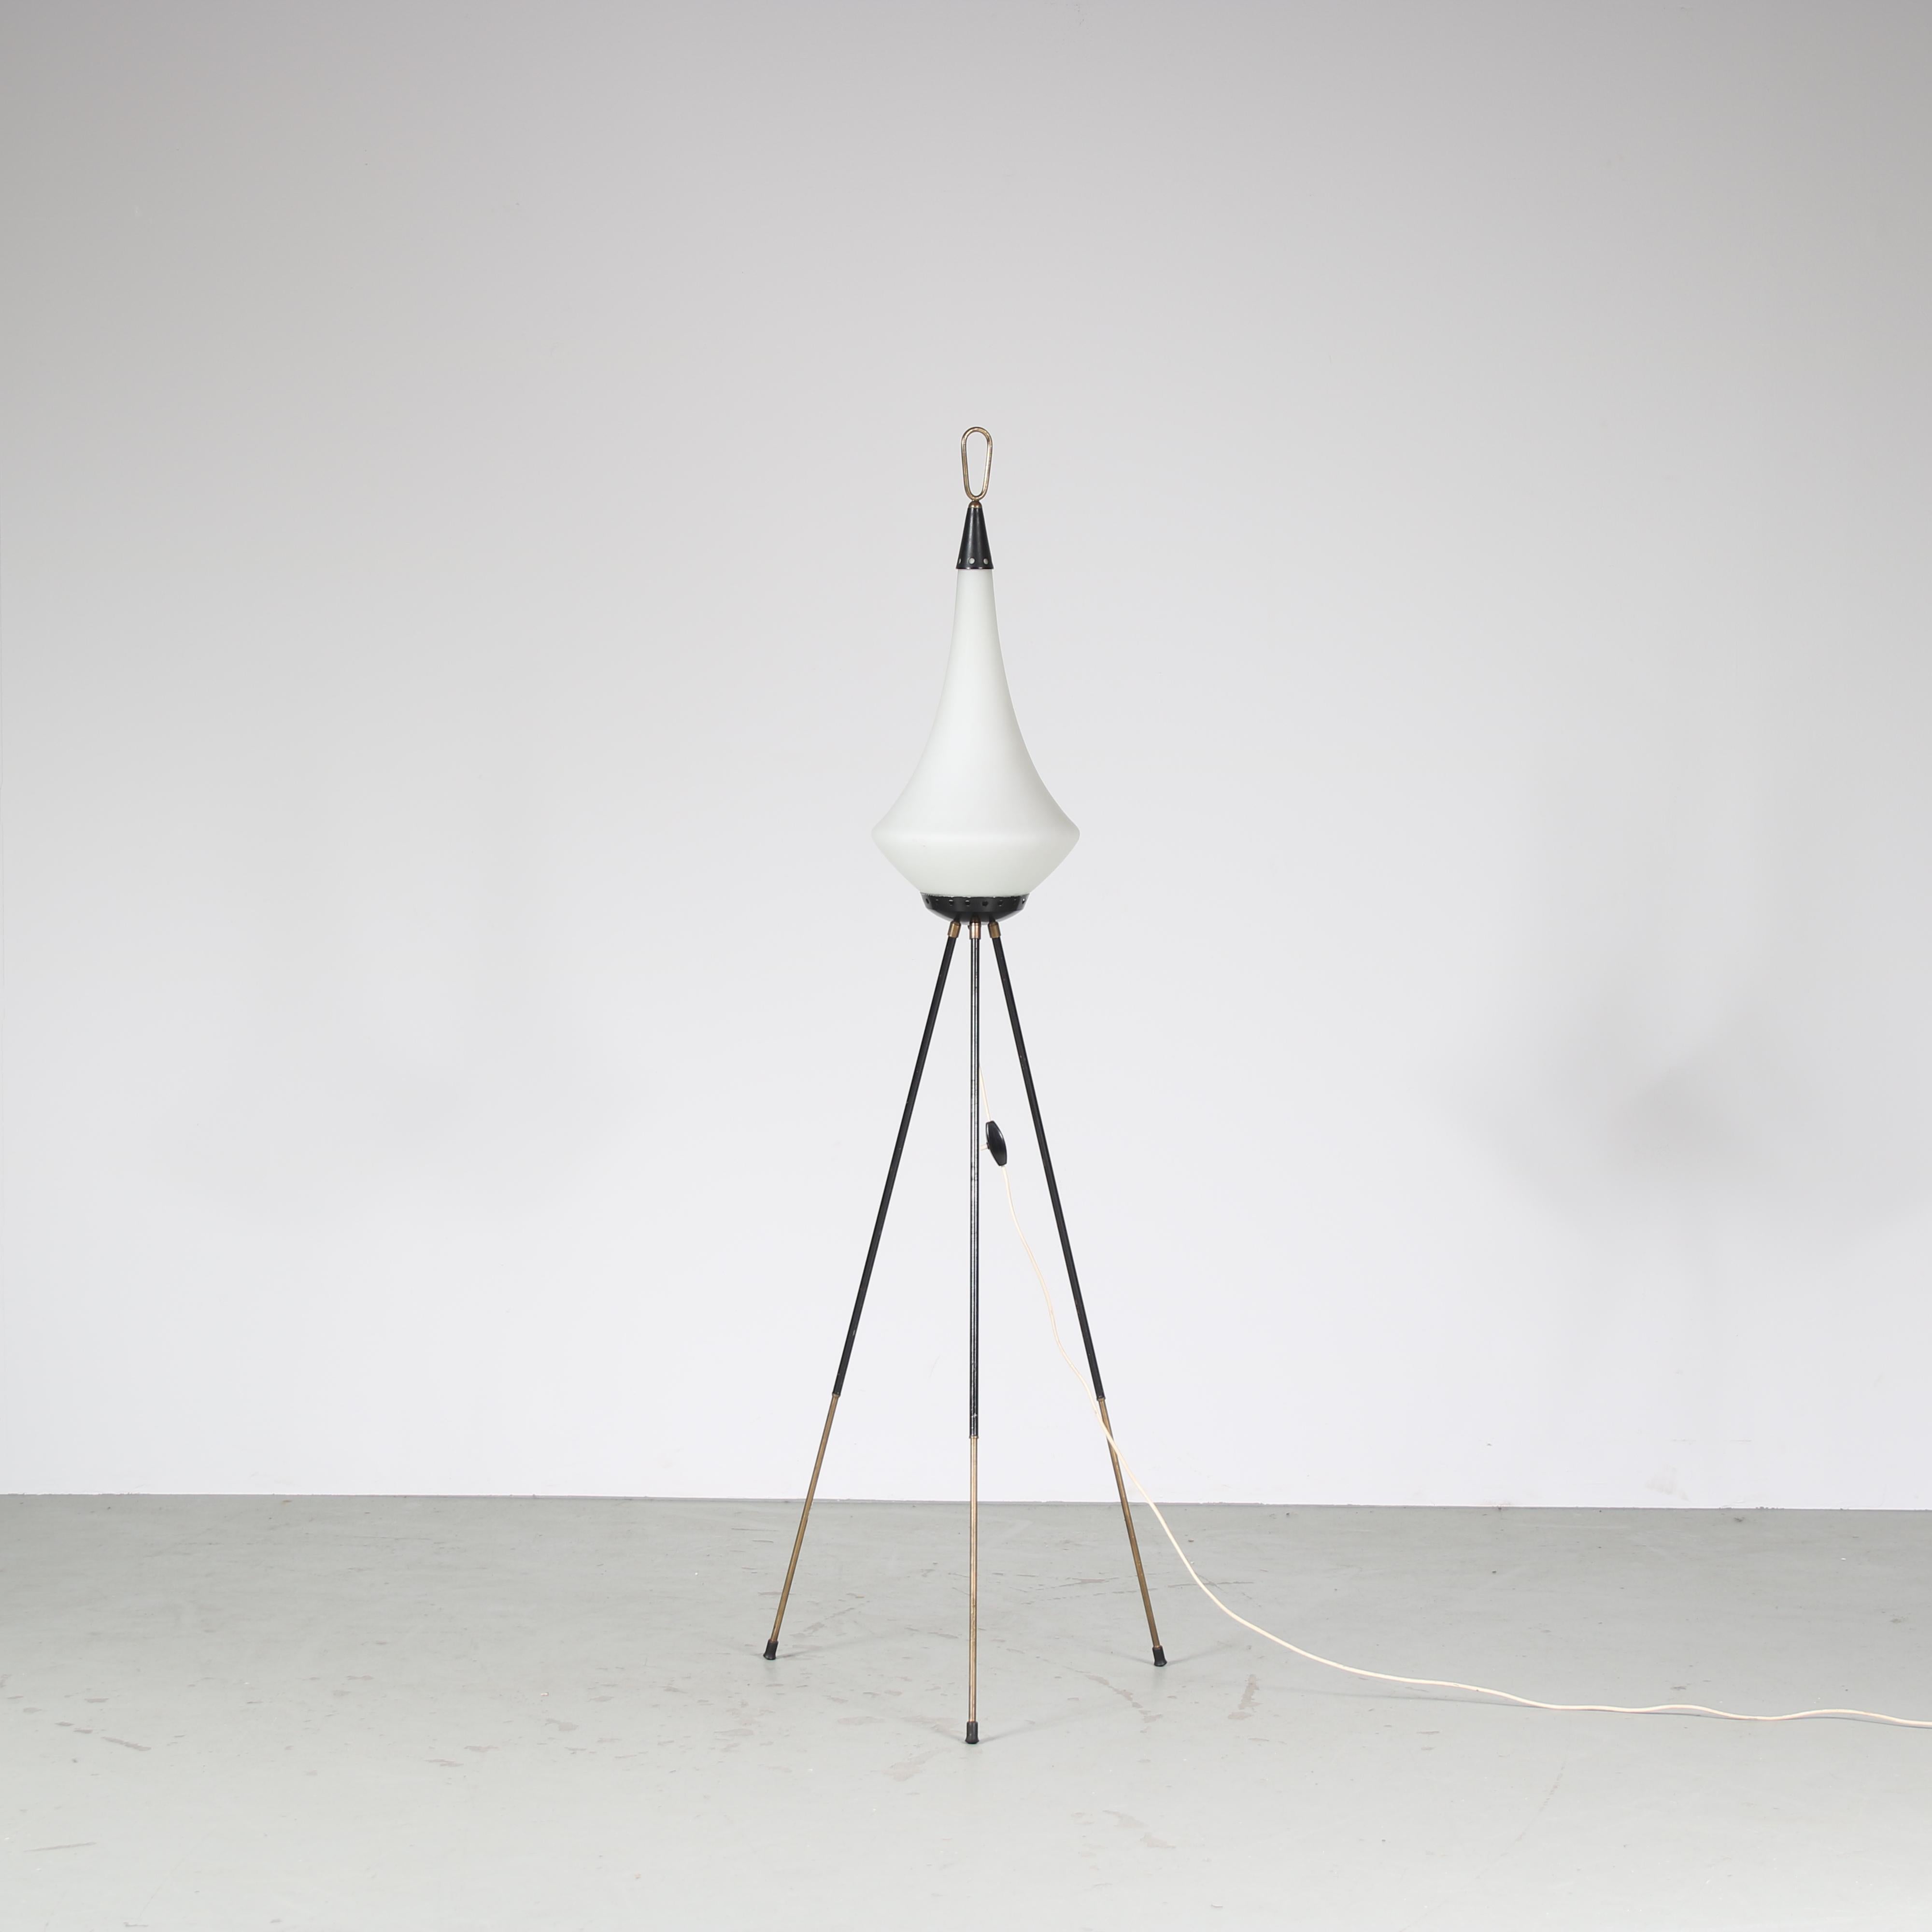 A fantastic floor lamp manufactured by Stilnovo in Italy around 1950.

Made of high quality black lacquered metal with brass details. The elegant tripod shape of the tubular base gives it a most luxurious appeal, nicely complimented by the milk